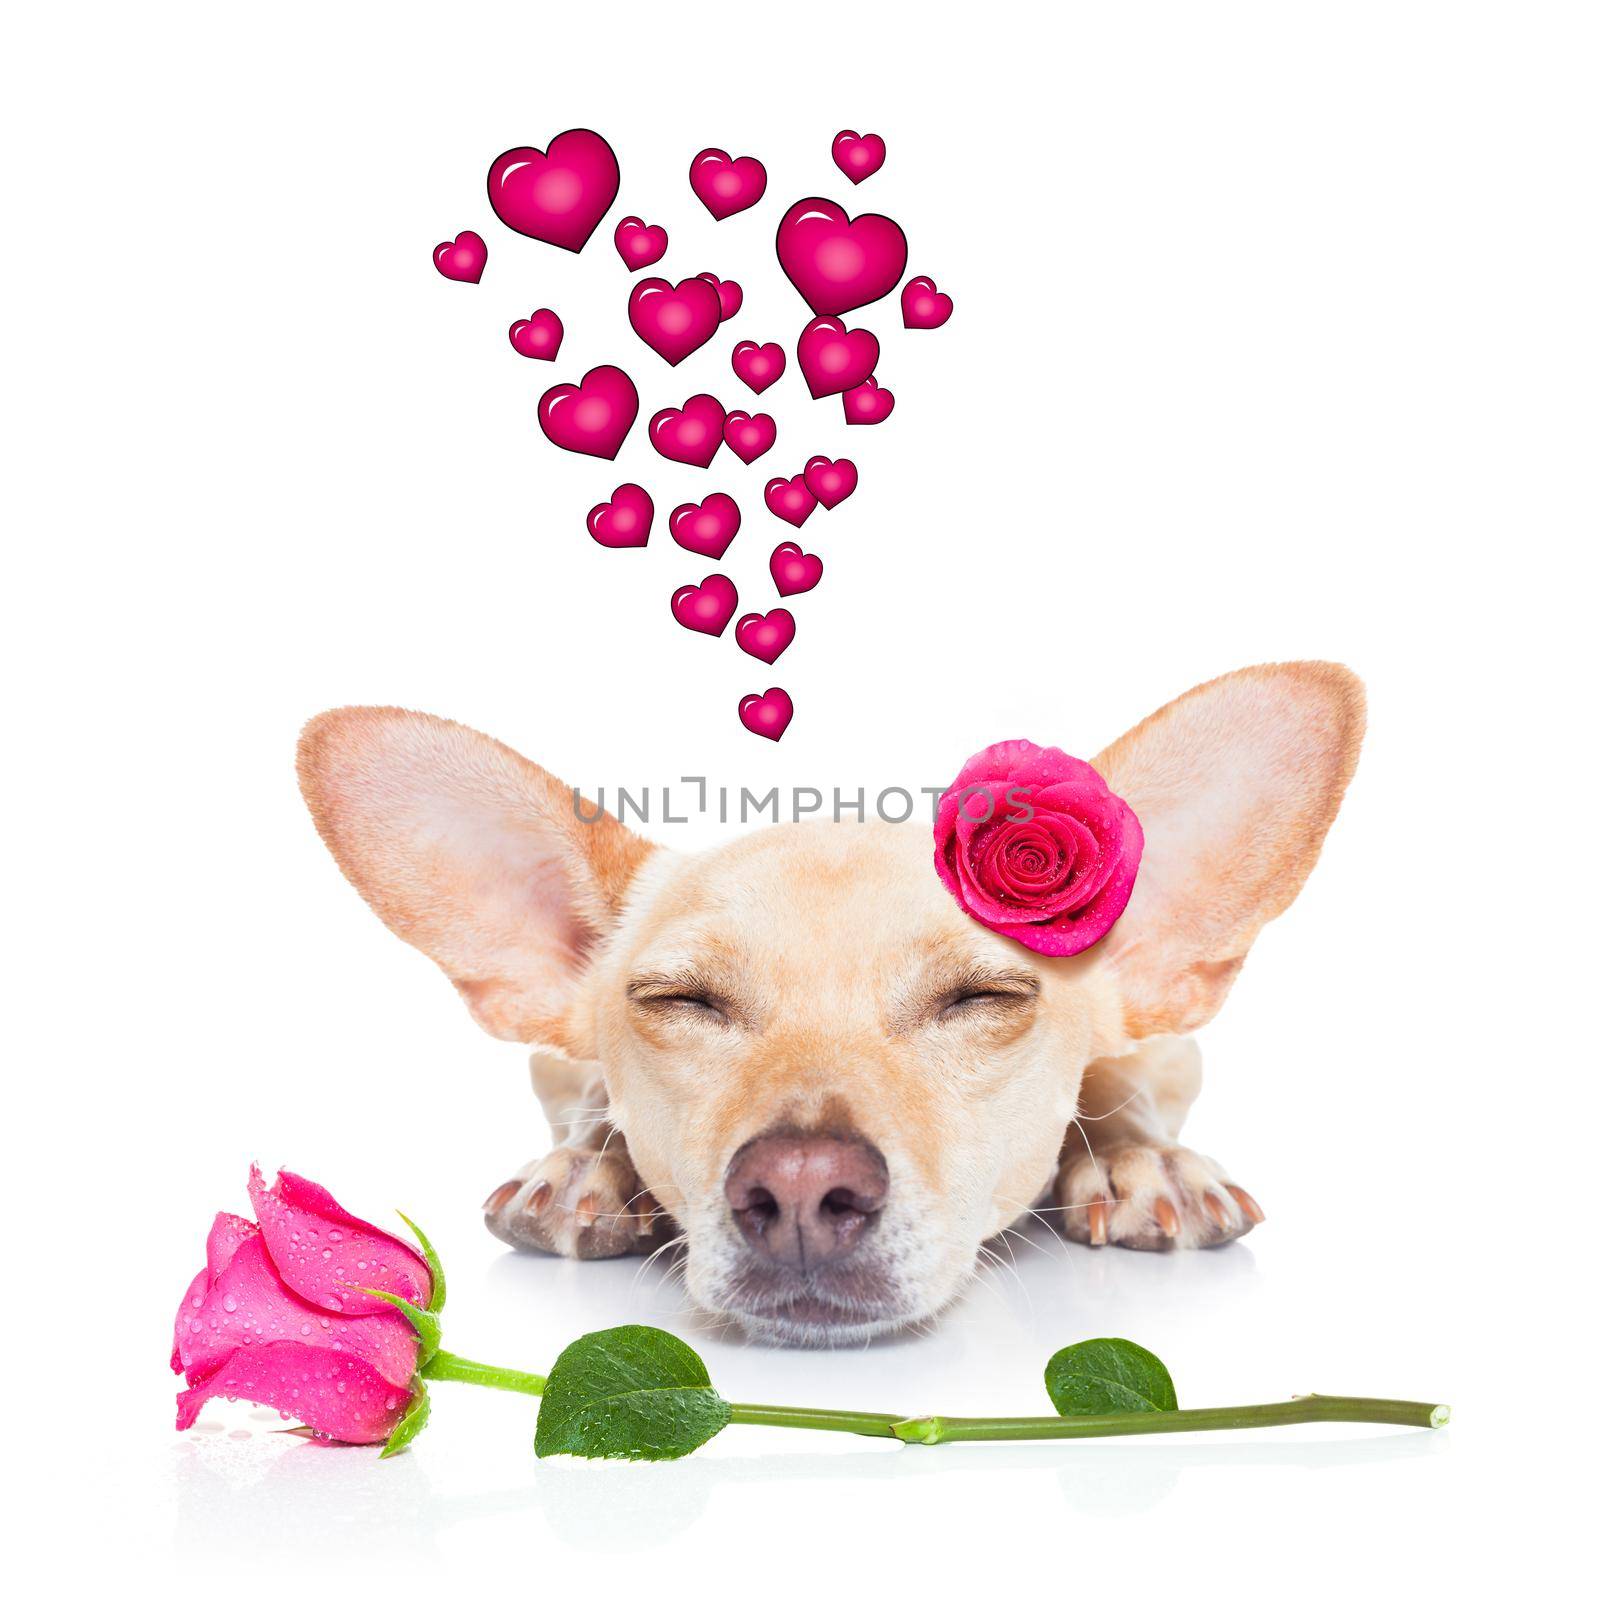 chihuahua dog looking and staring at you   ,while lying on the ground or floor, with a valentines rose on head and on floor, isolated on white background,